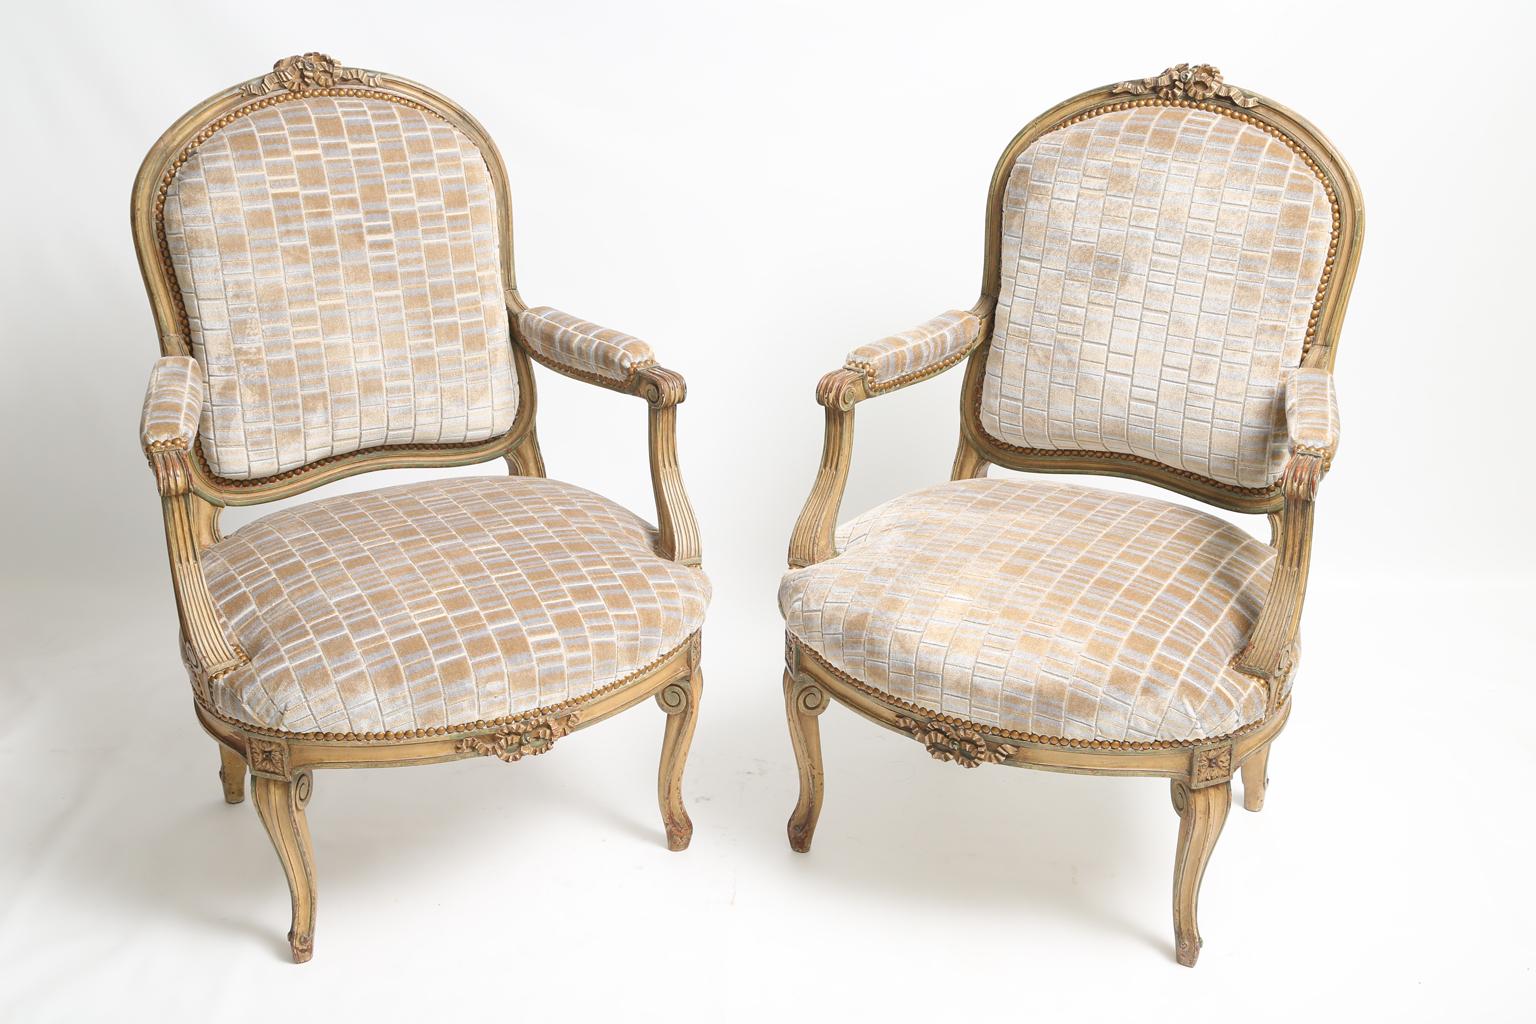 Pair of armchairs, having a painted finish showing natural wear, each arched, channelled frame surmounted by carved ribbons, padded backrest flanked by scrolling arms with padded elbow rests, raised on fluted, down swept terminals, its stuff-over